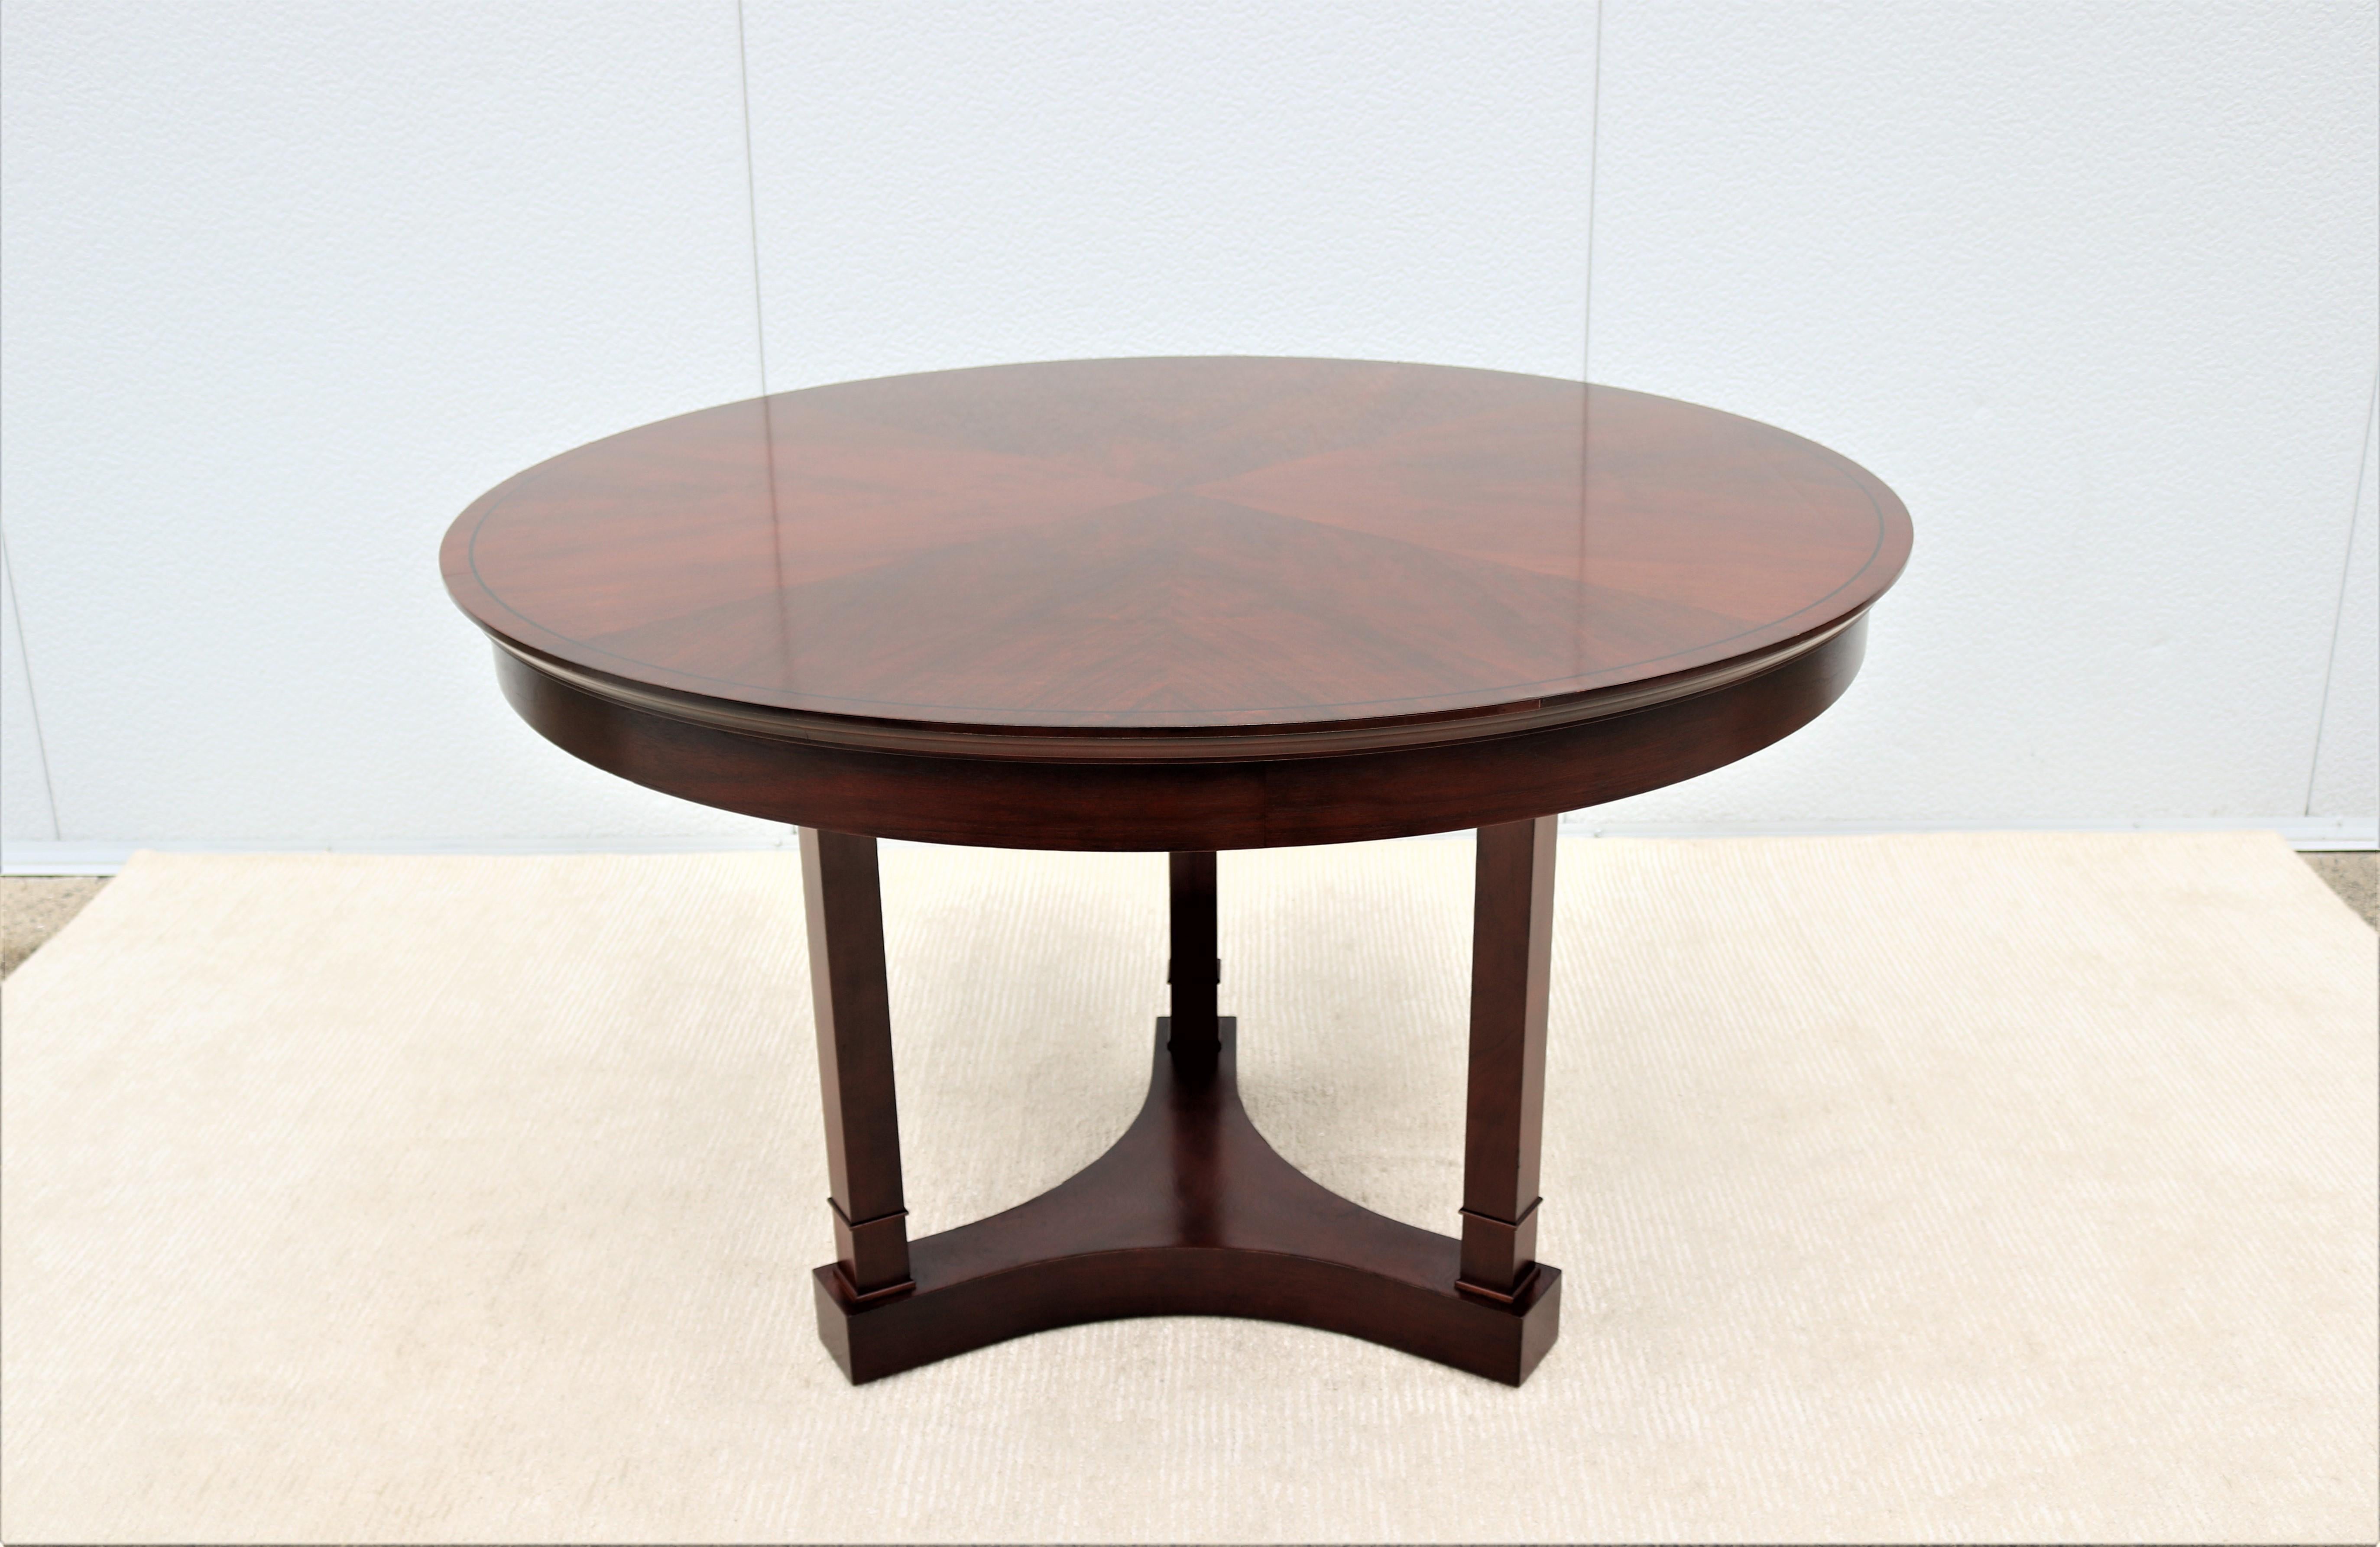 Biedermeier Traditional Classic Kimball Innsbruck Round Wood Dining Table, Conference Table